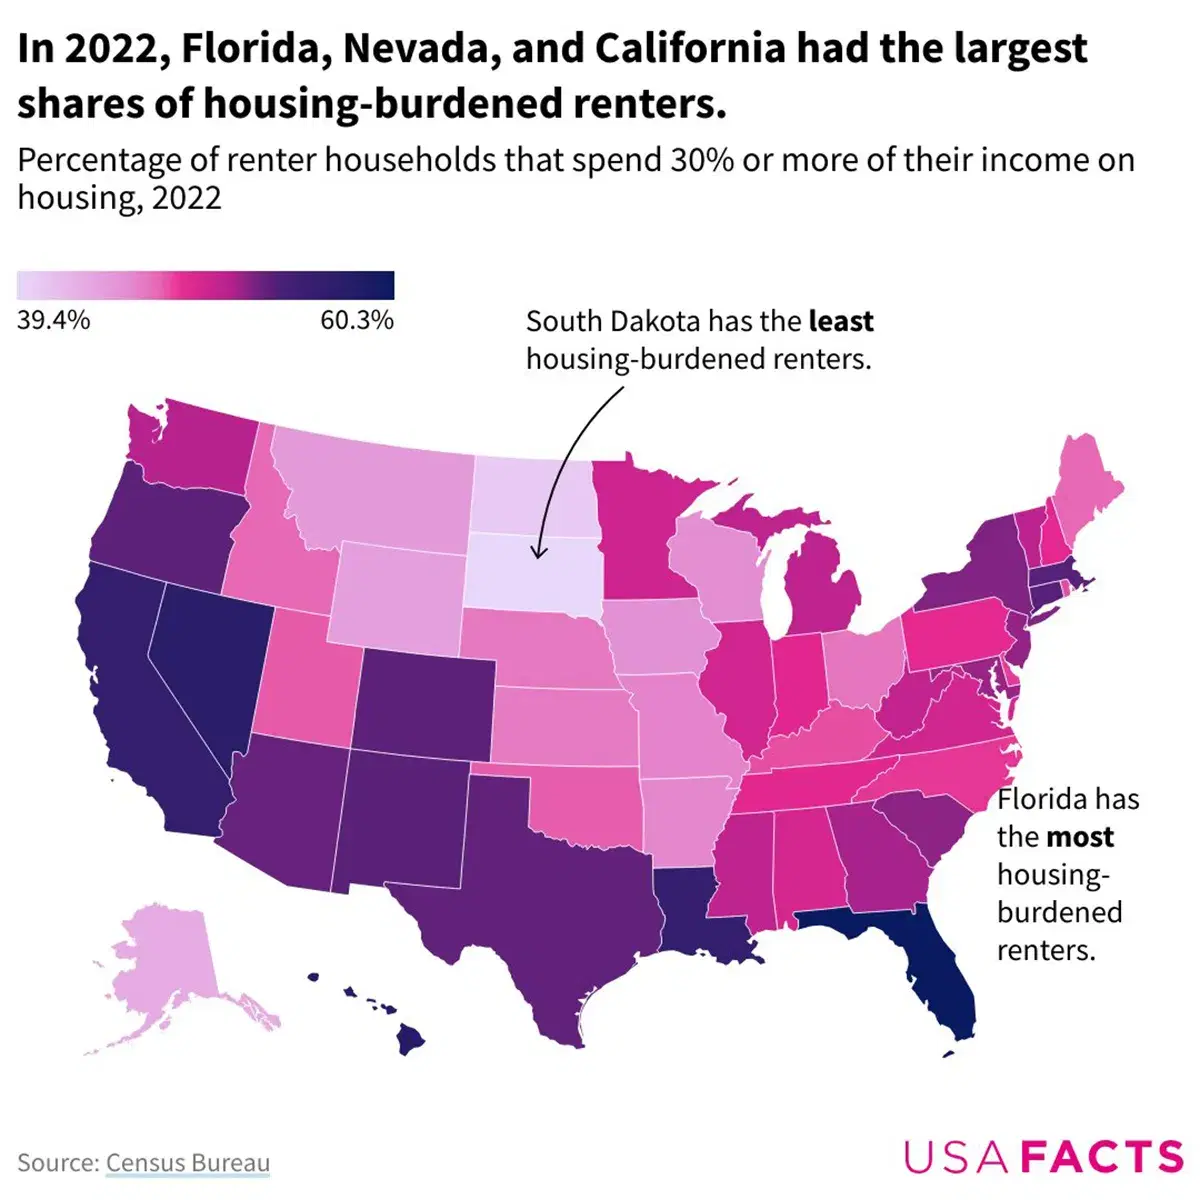 Where do renters spend more of their income on housing in the US?